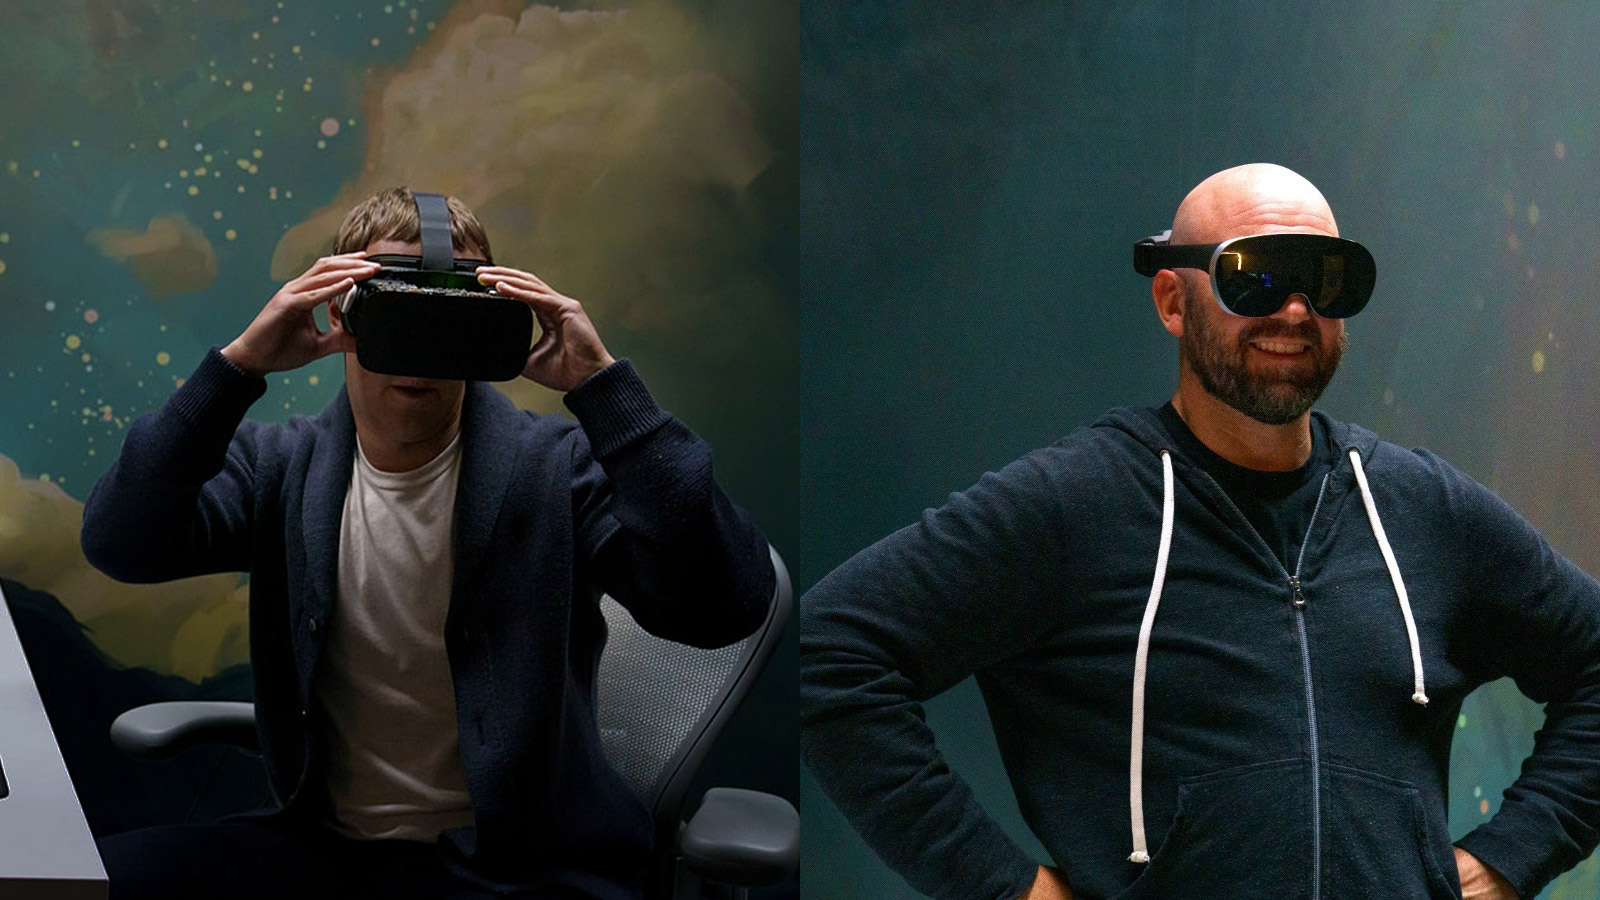 Report: Meta to Release Four New VR Headsets by 2024, Starting with Project Cambria in September